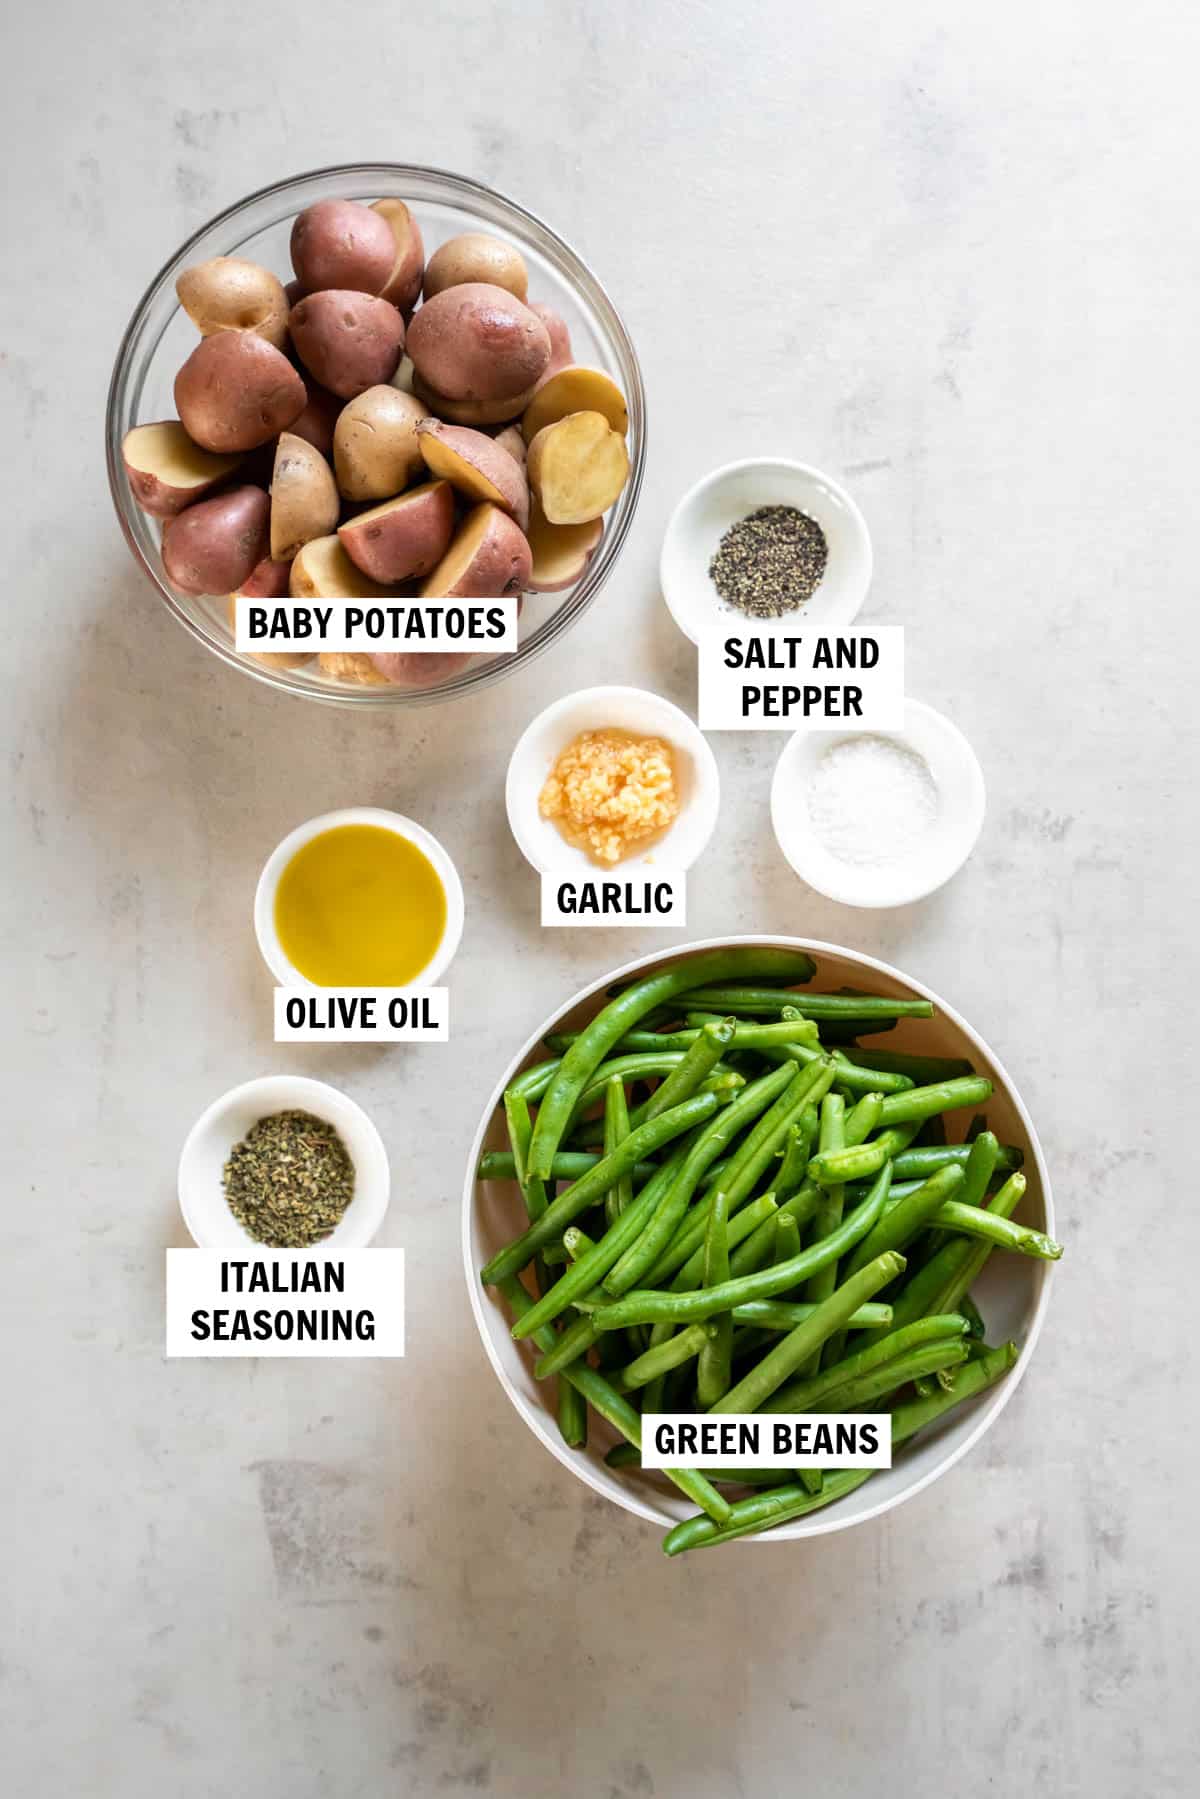 All of the ingredients for roasted green beans and potatoes on a white countertop.